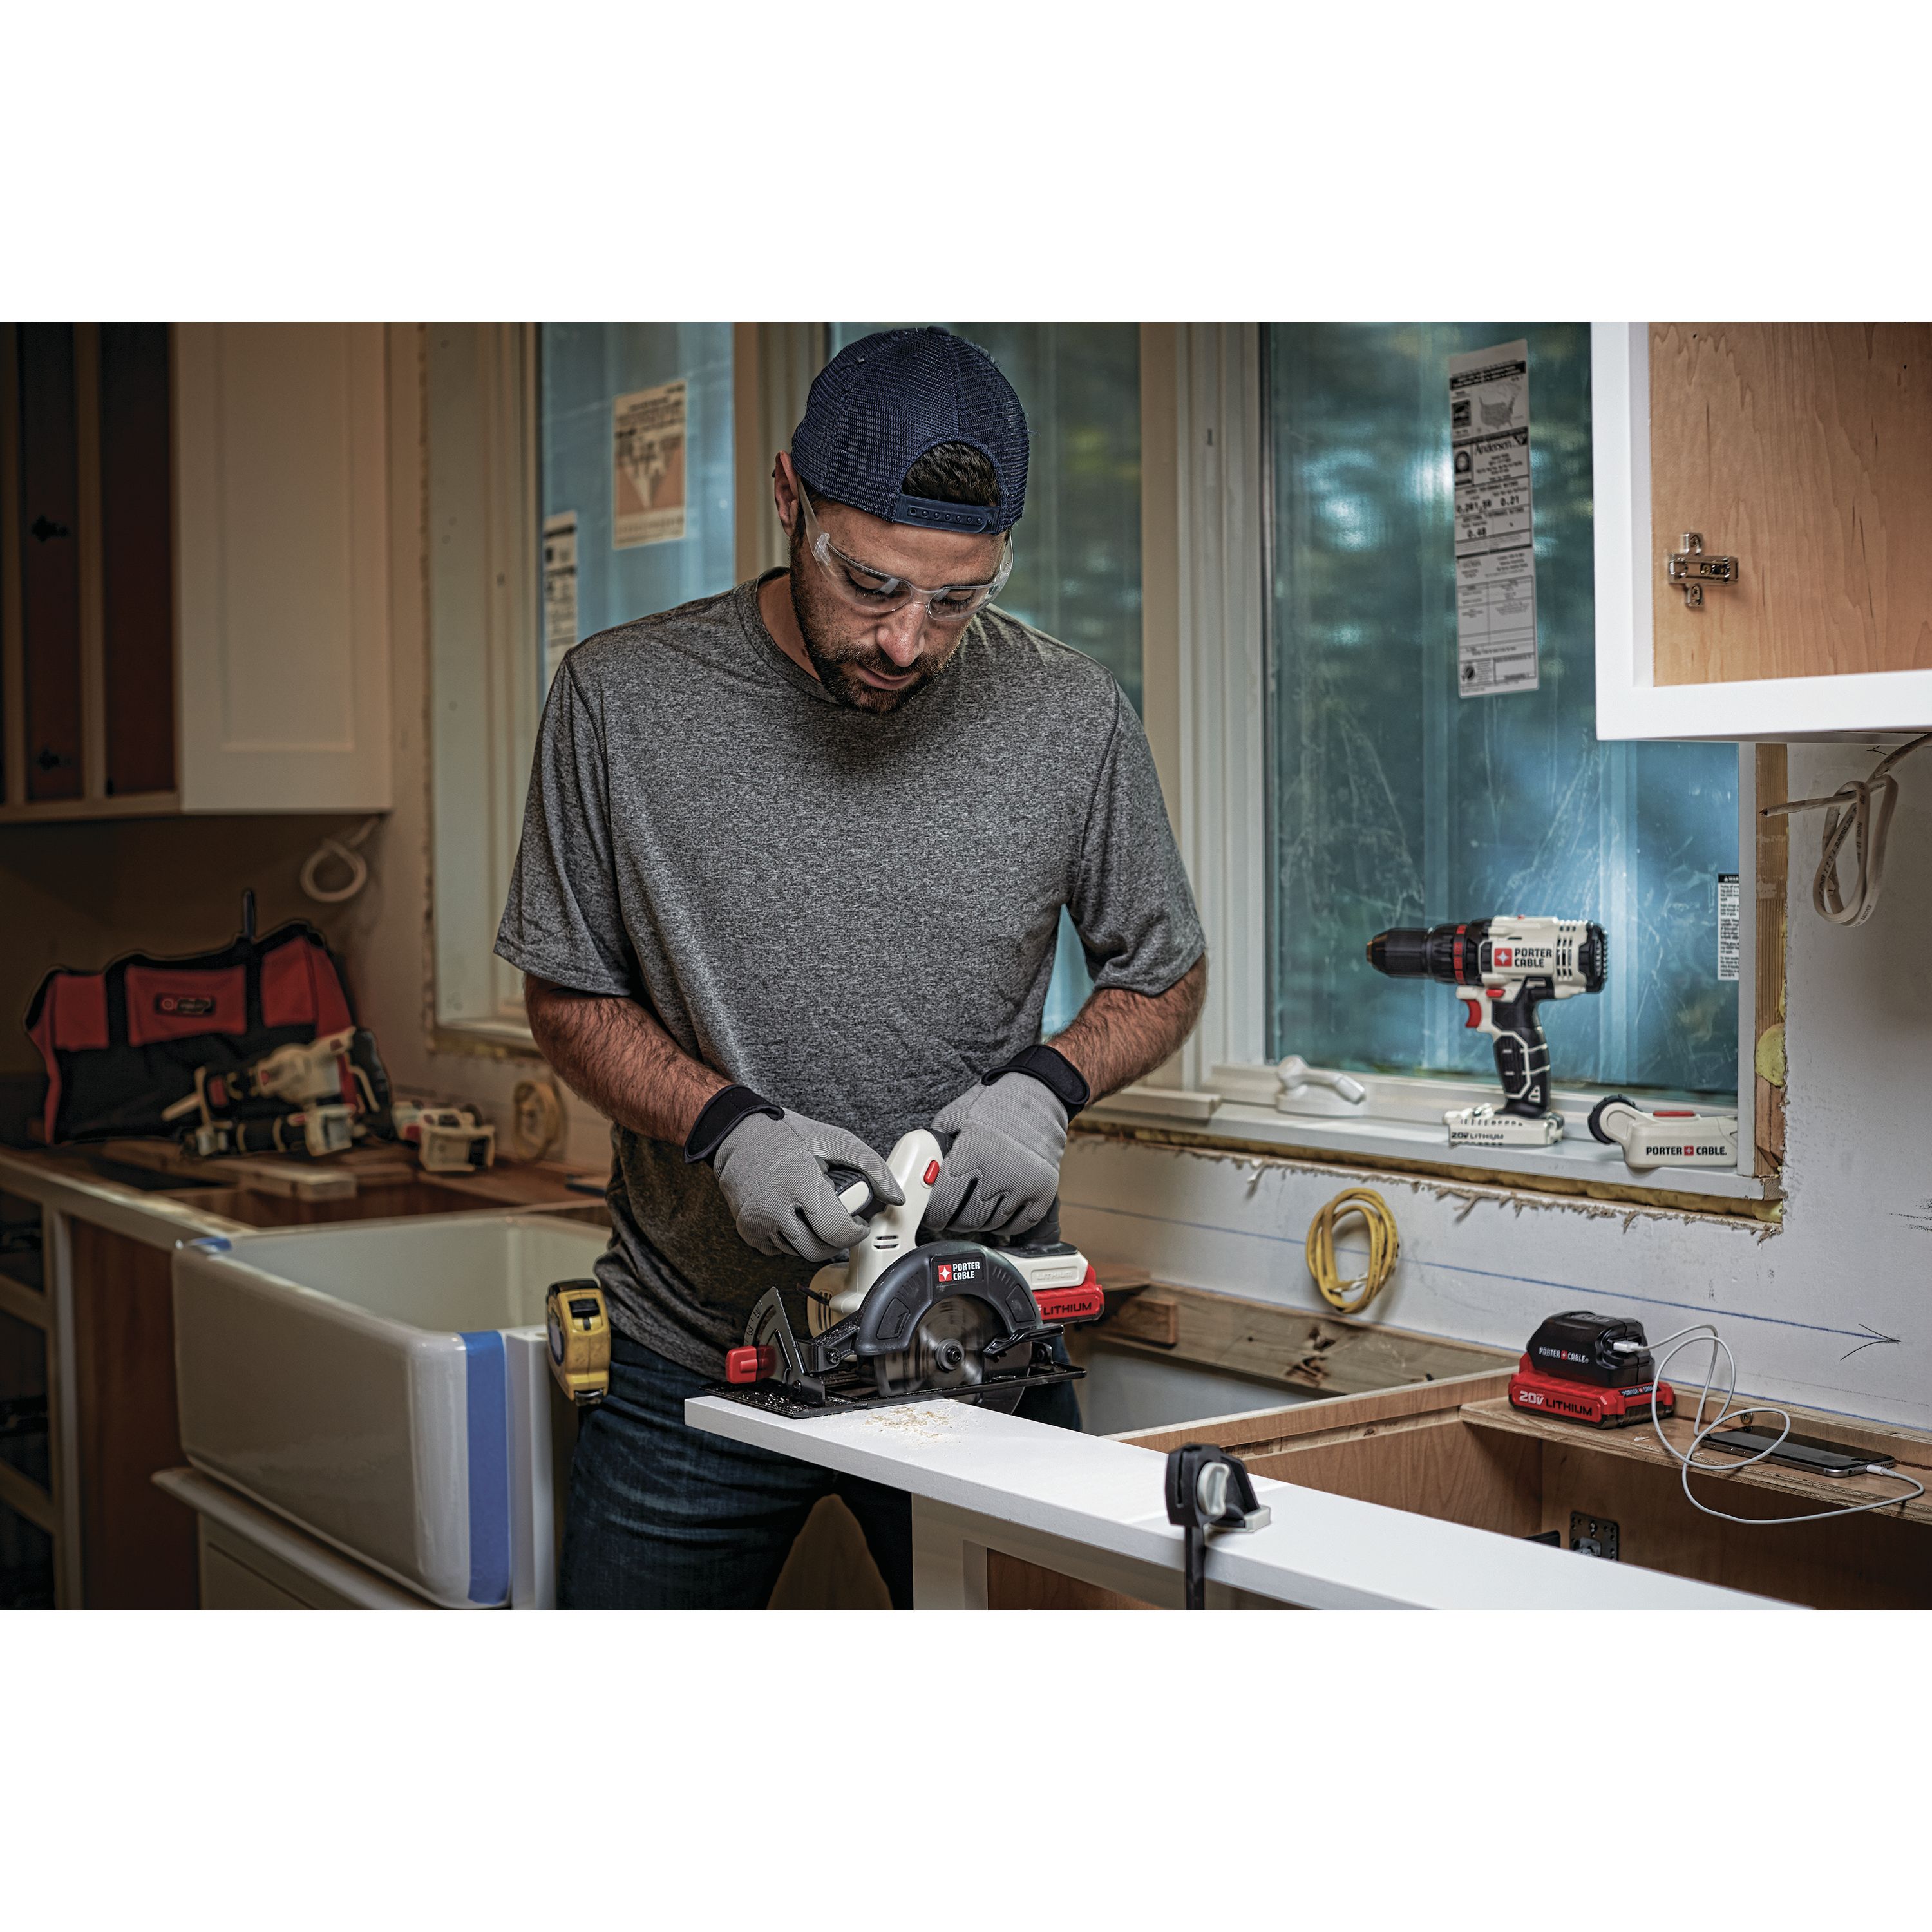 PORTER CABLE 20V MAX Lithium-Ion 6.5-Inch Cordless Circular Saw (Bare Tool / Battery Sold Separately), PCC660B - image 3 of 5